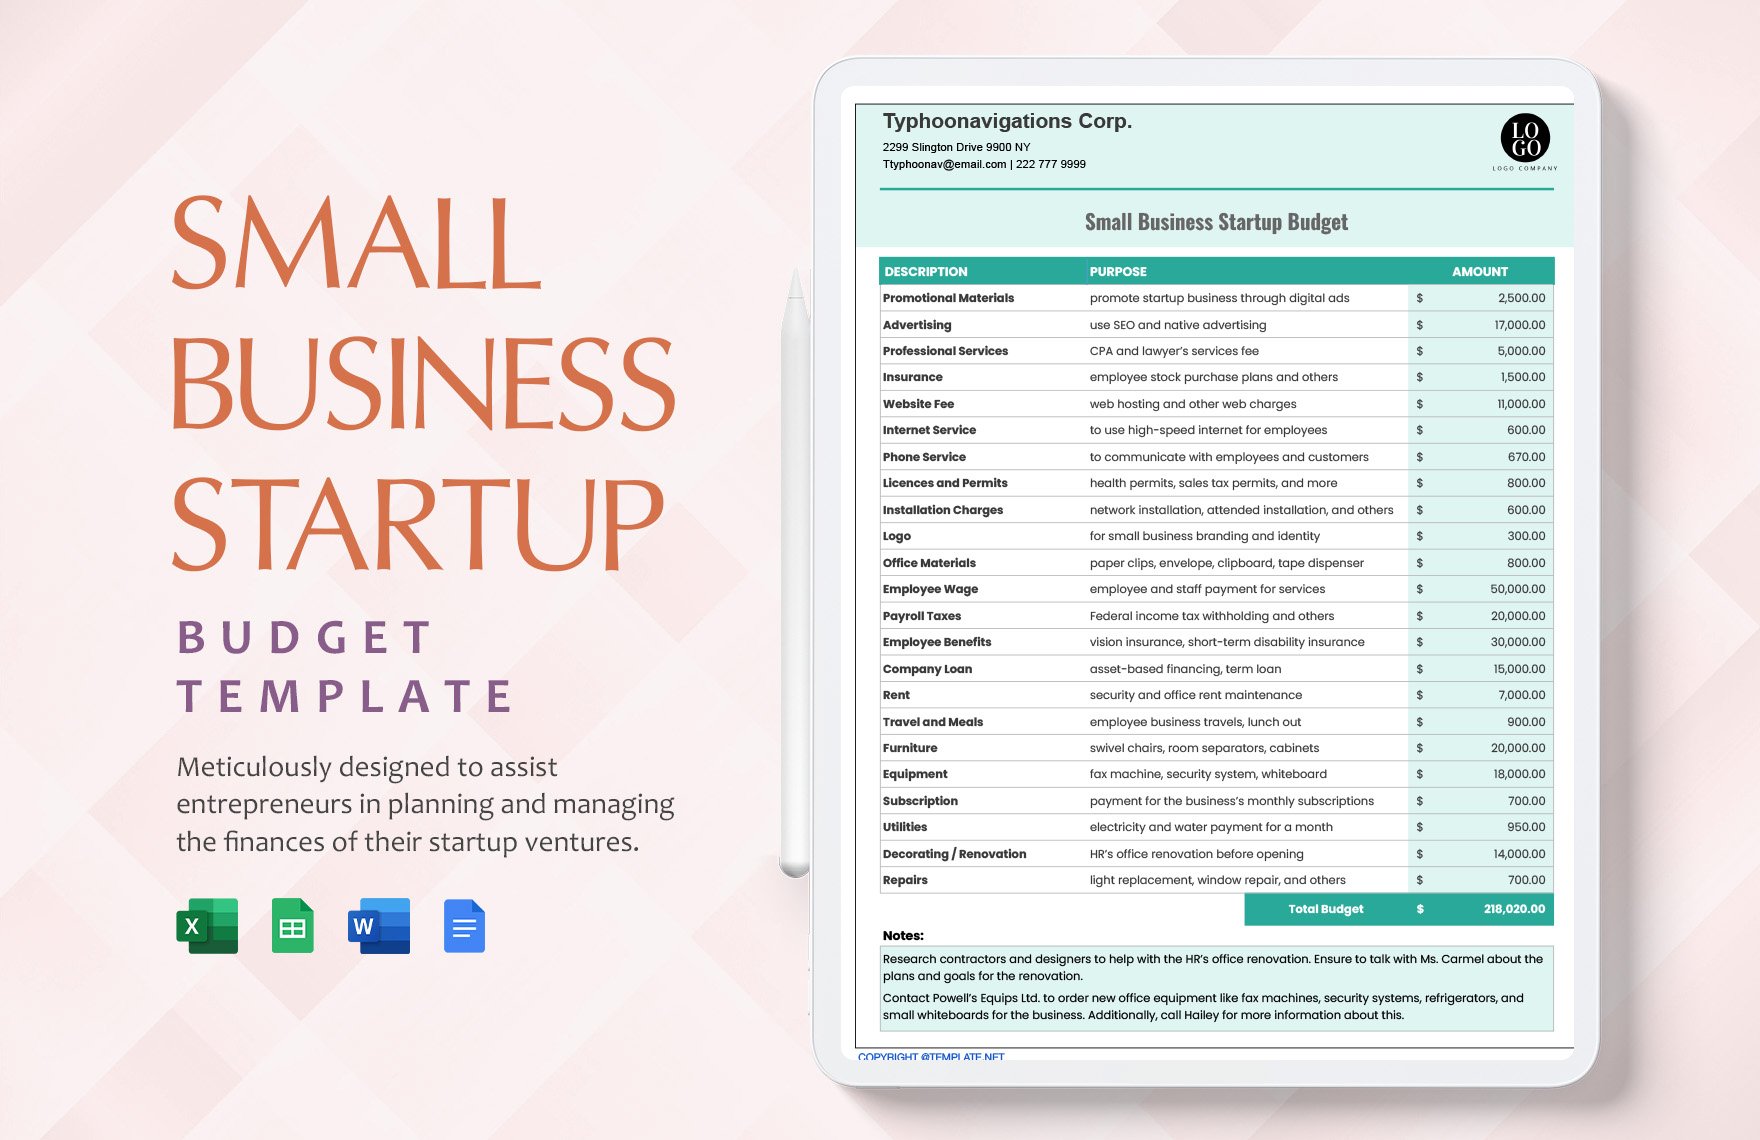 Small Business Startup Budget Template in Word, Google Docs, Excel, Google Sheets